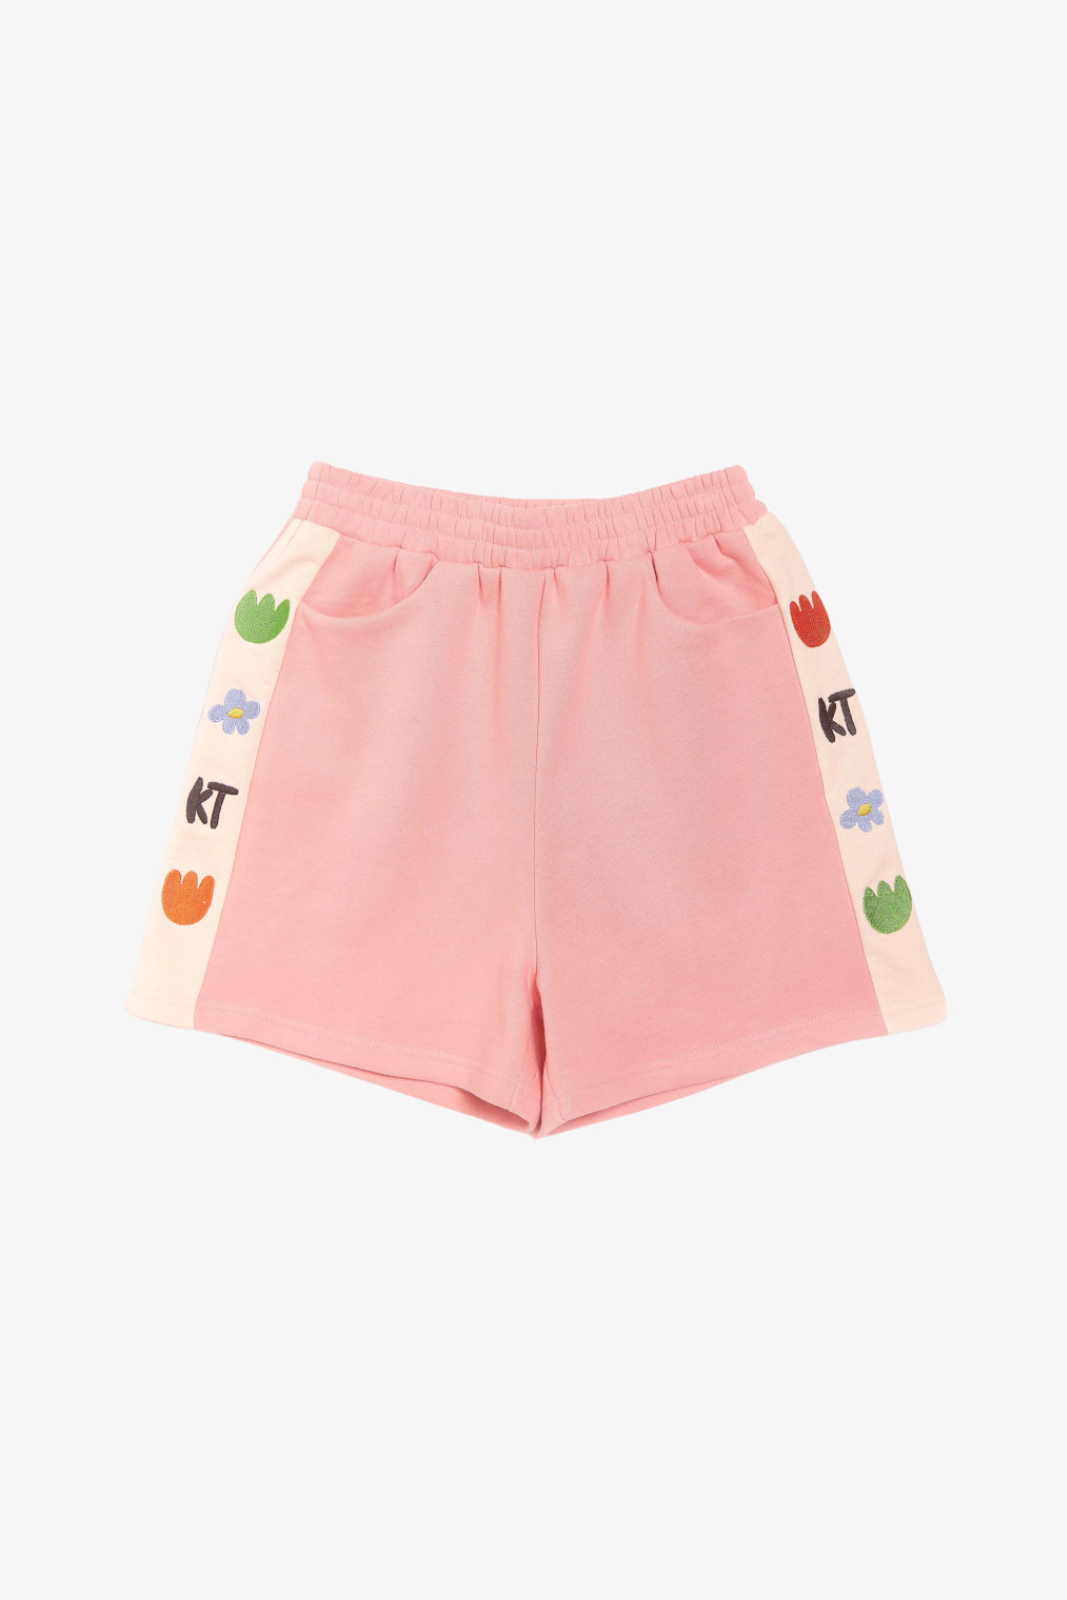 The Scoot Shorts